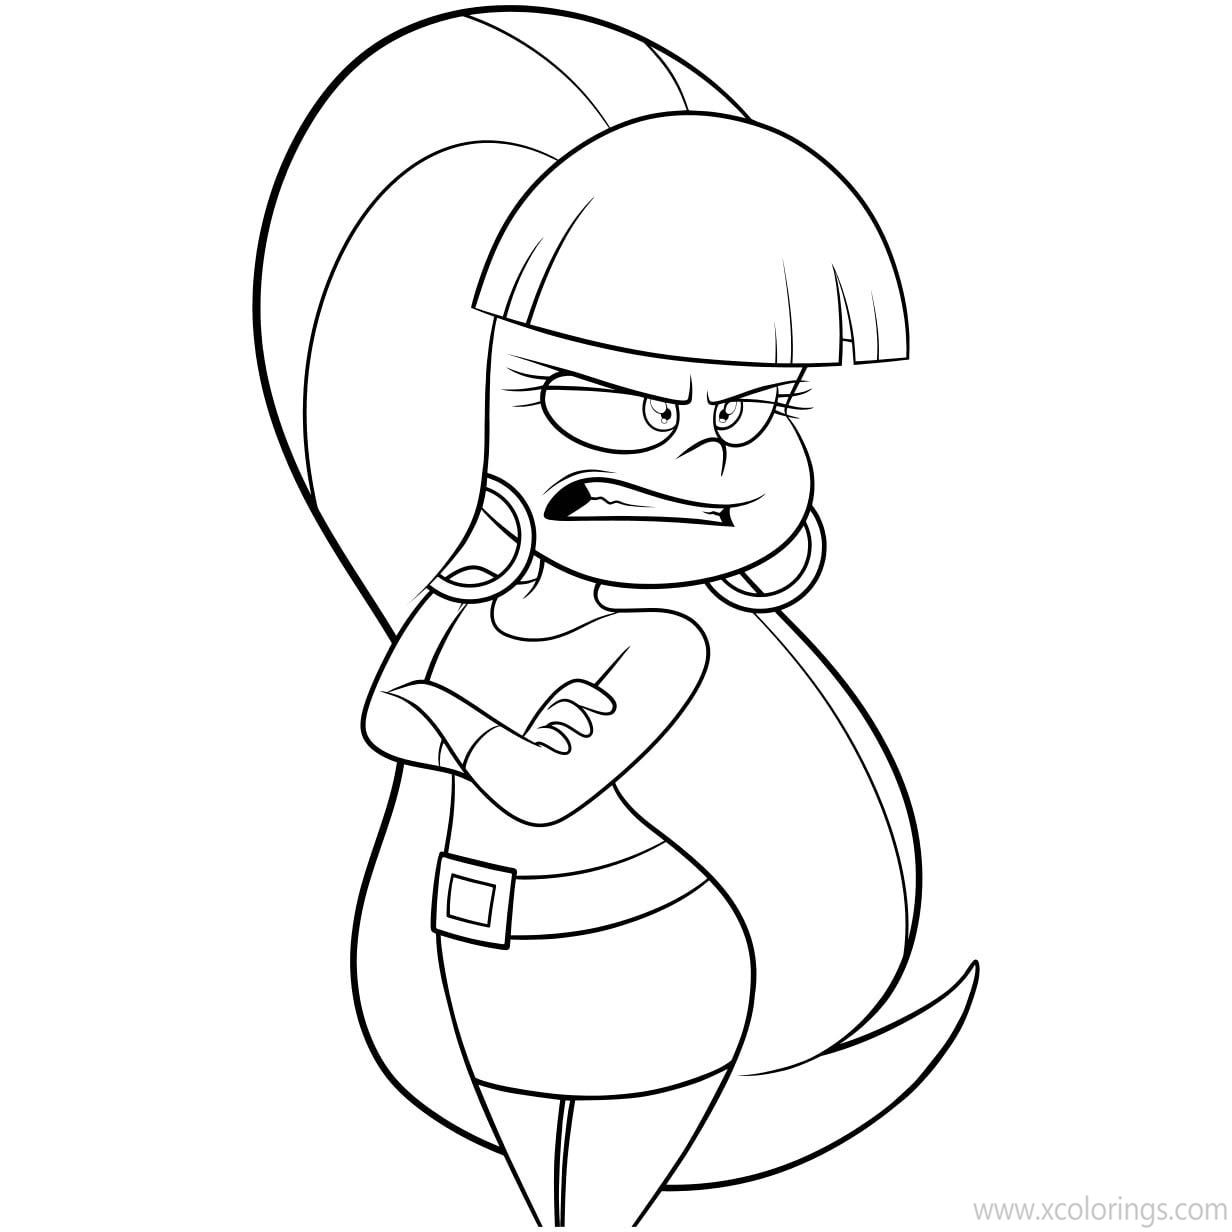 Free Gravity Falls Coloring Pages Pacific Northwest printable